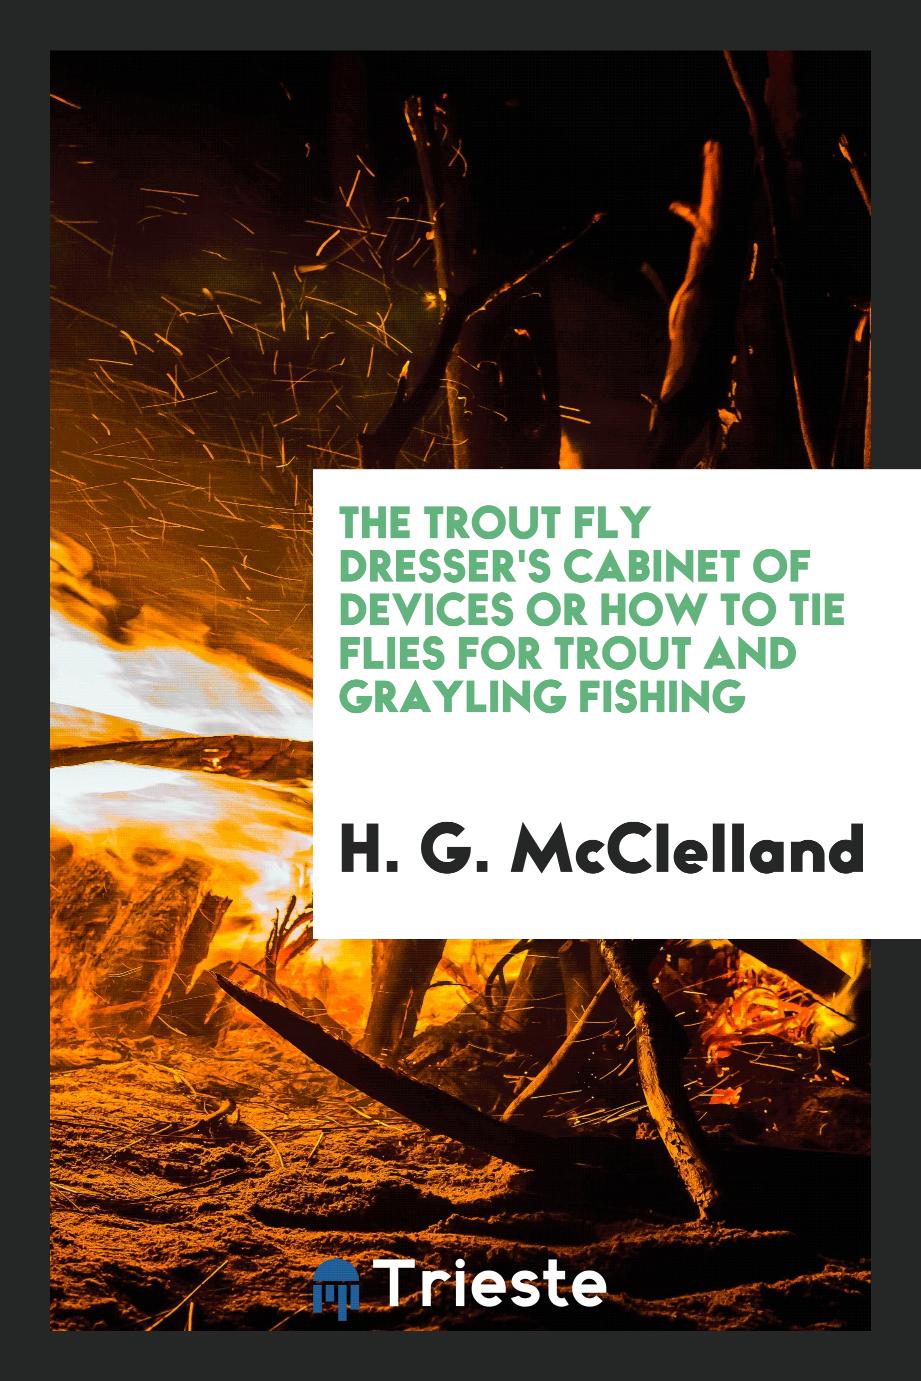 The Trout Fly Dresser's Cabinet of Devices or How to Tie Flies for Trout and Grayling Fishing